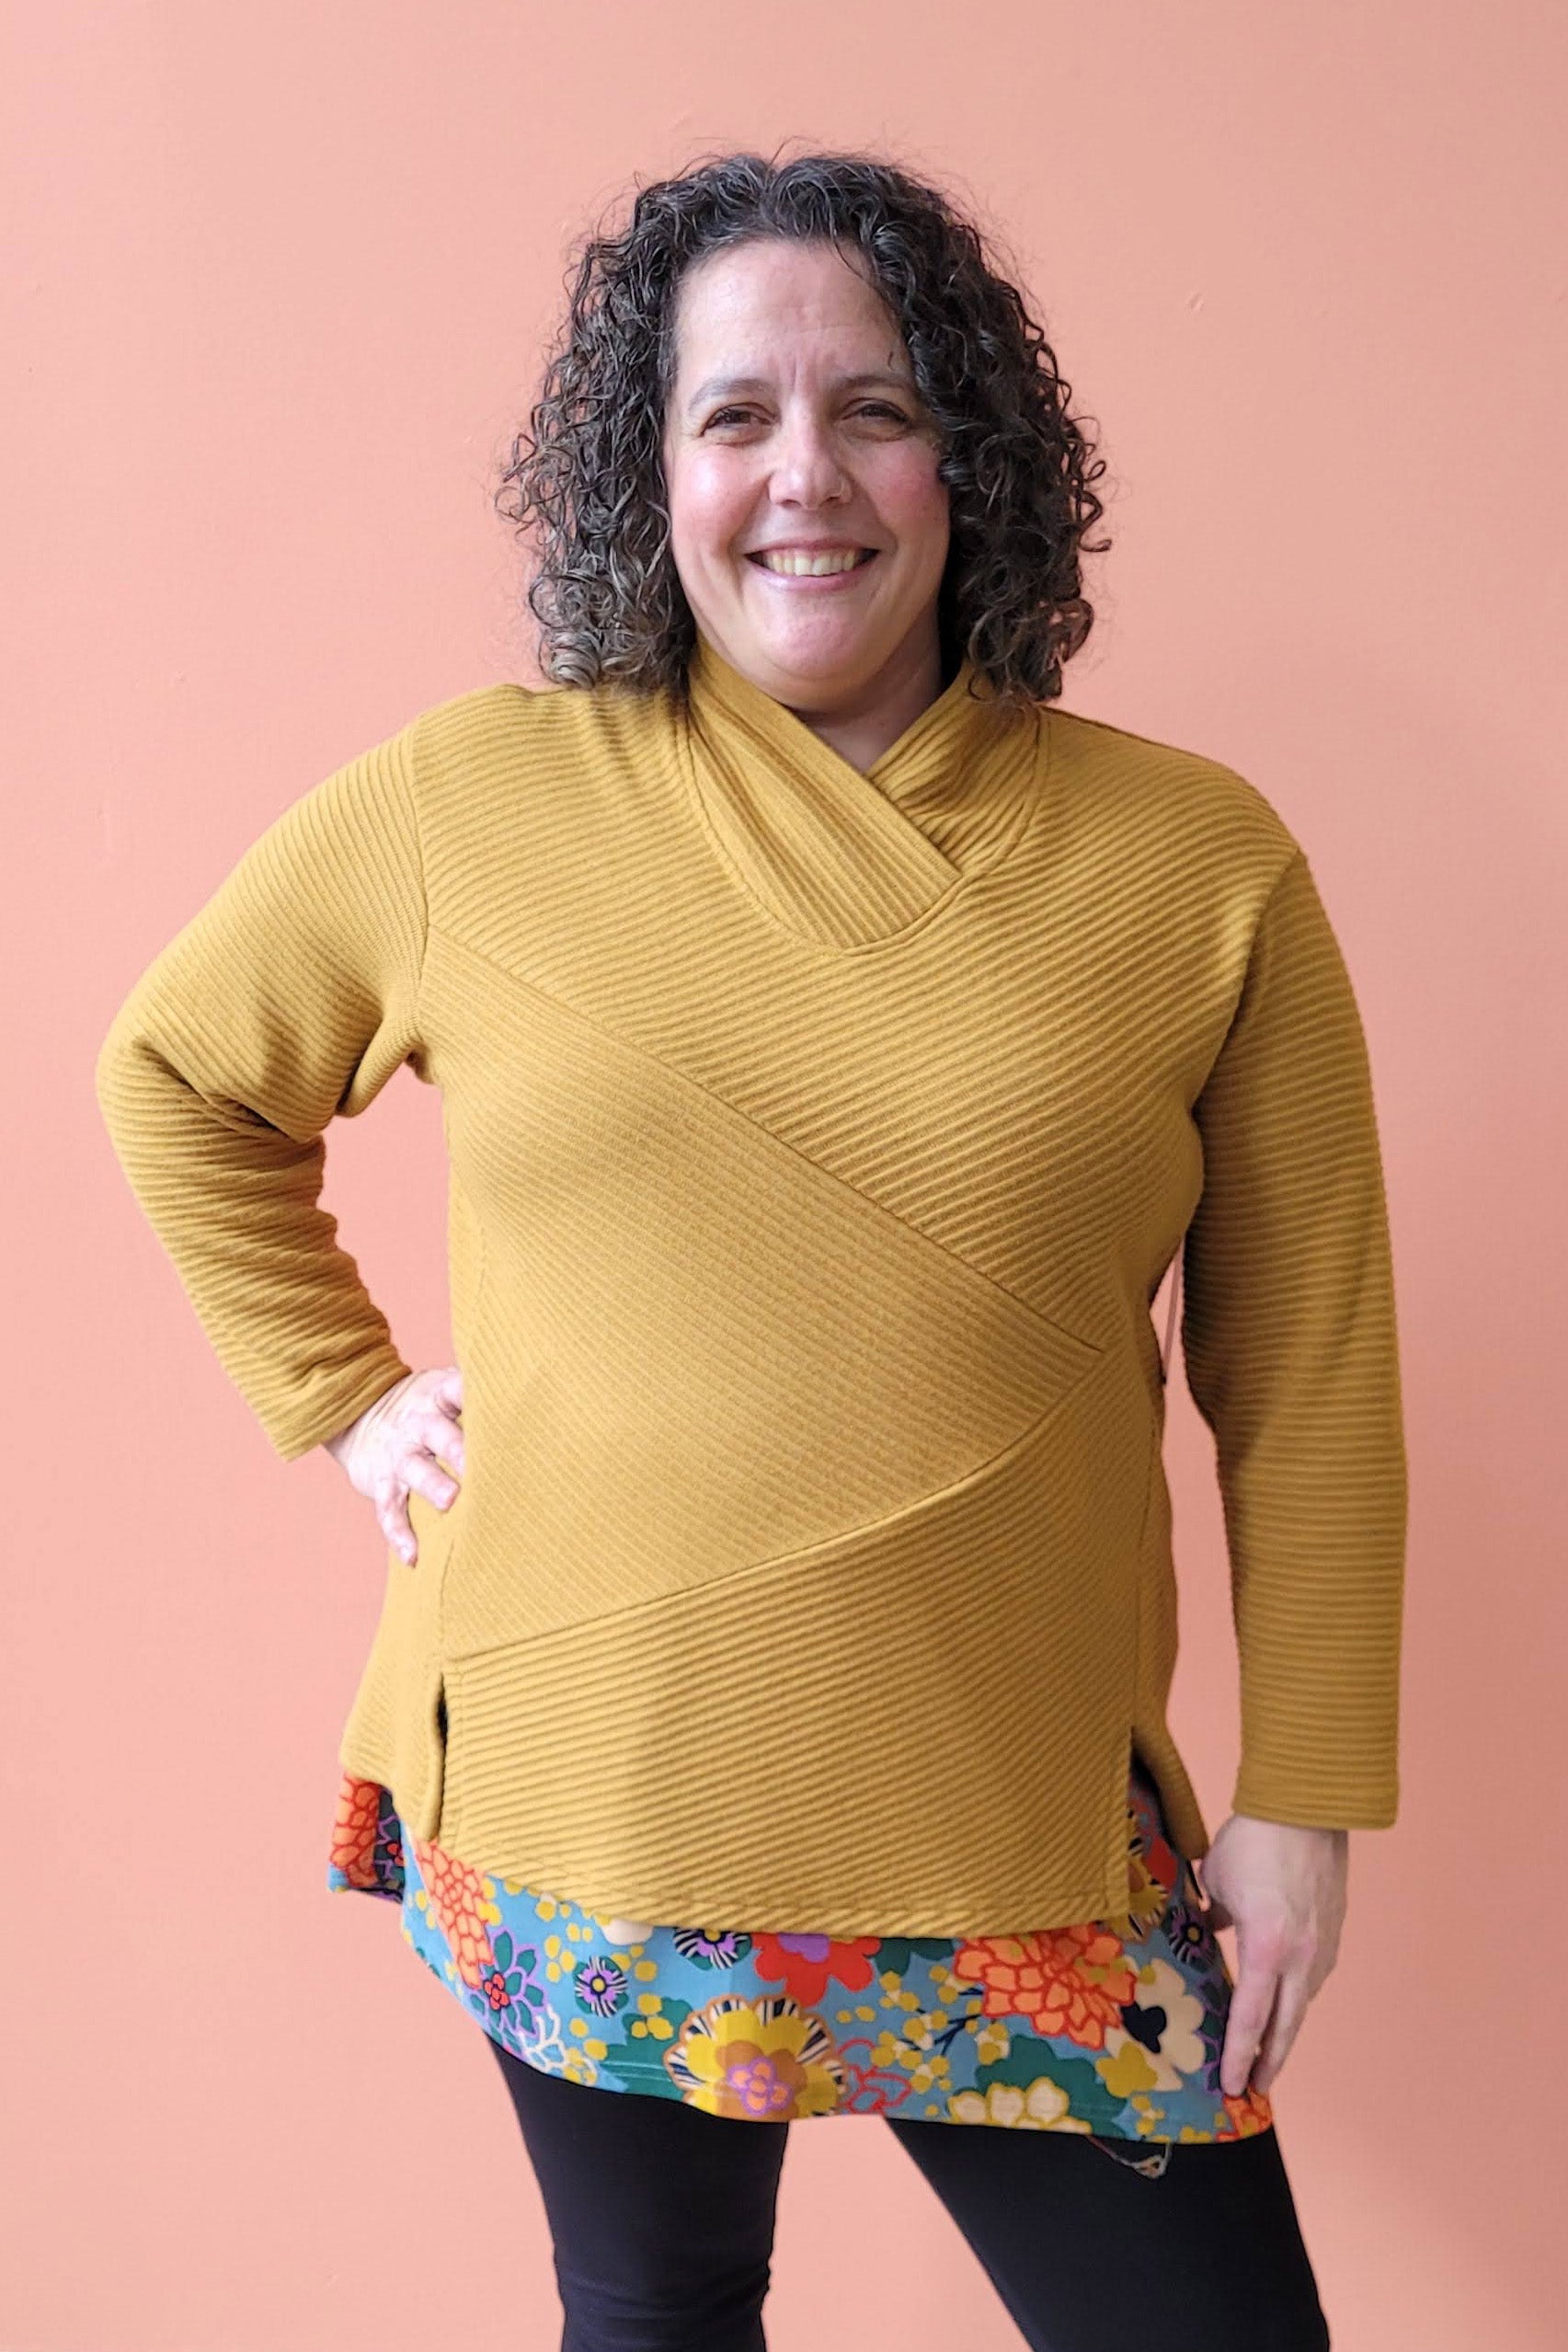 Karen Sweater by Solomia Design, Ocher, cross-over neckline, asymmetrical front panels, slits at the bottom, rib knit, sizes XS to L, made in Carleton Place